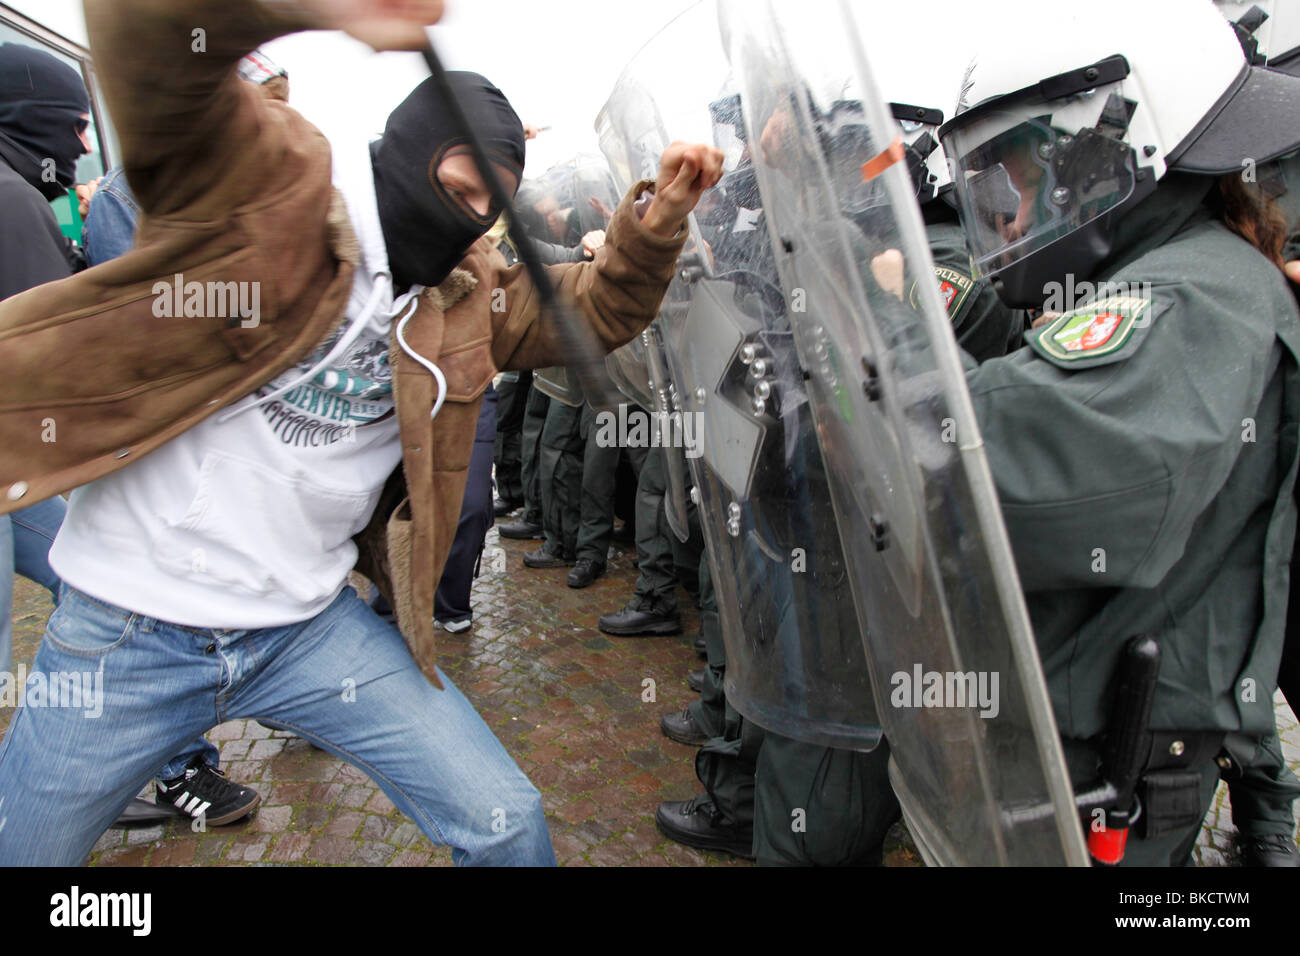 Violence against police officers. Exercise of an anti riot police unit. Violent demonstrators attacks police forces. Stock Photo